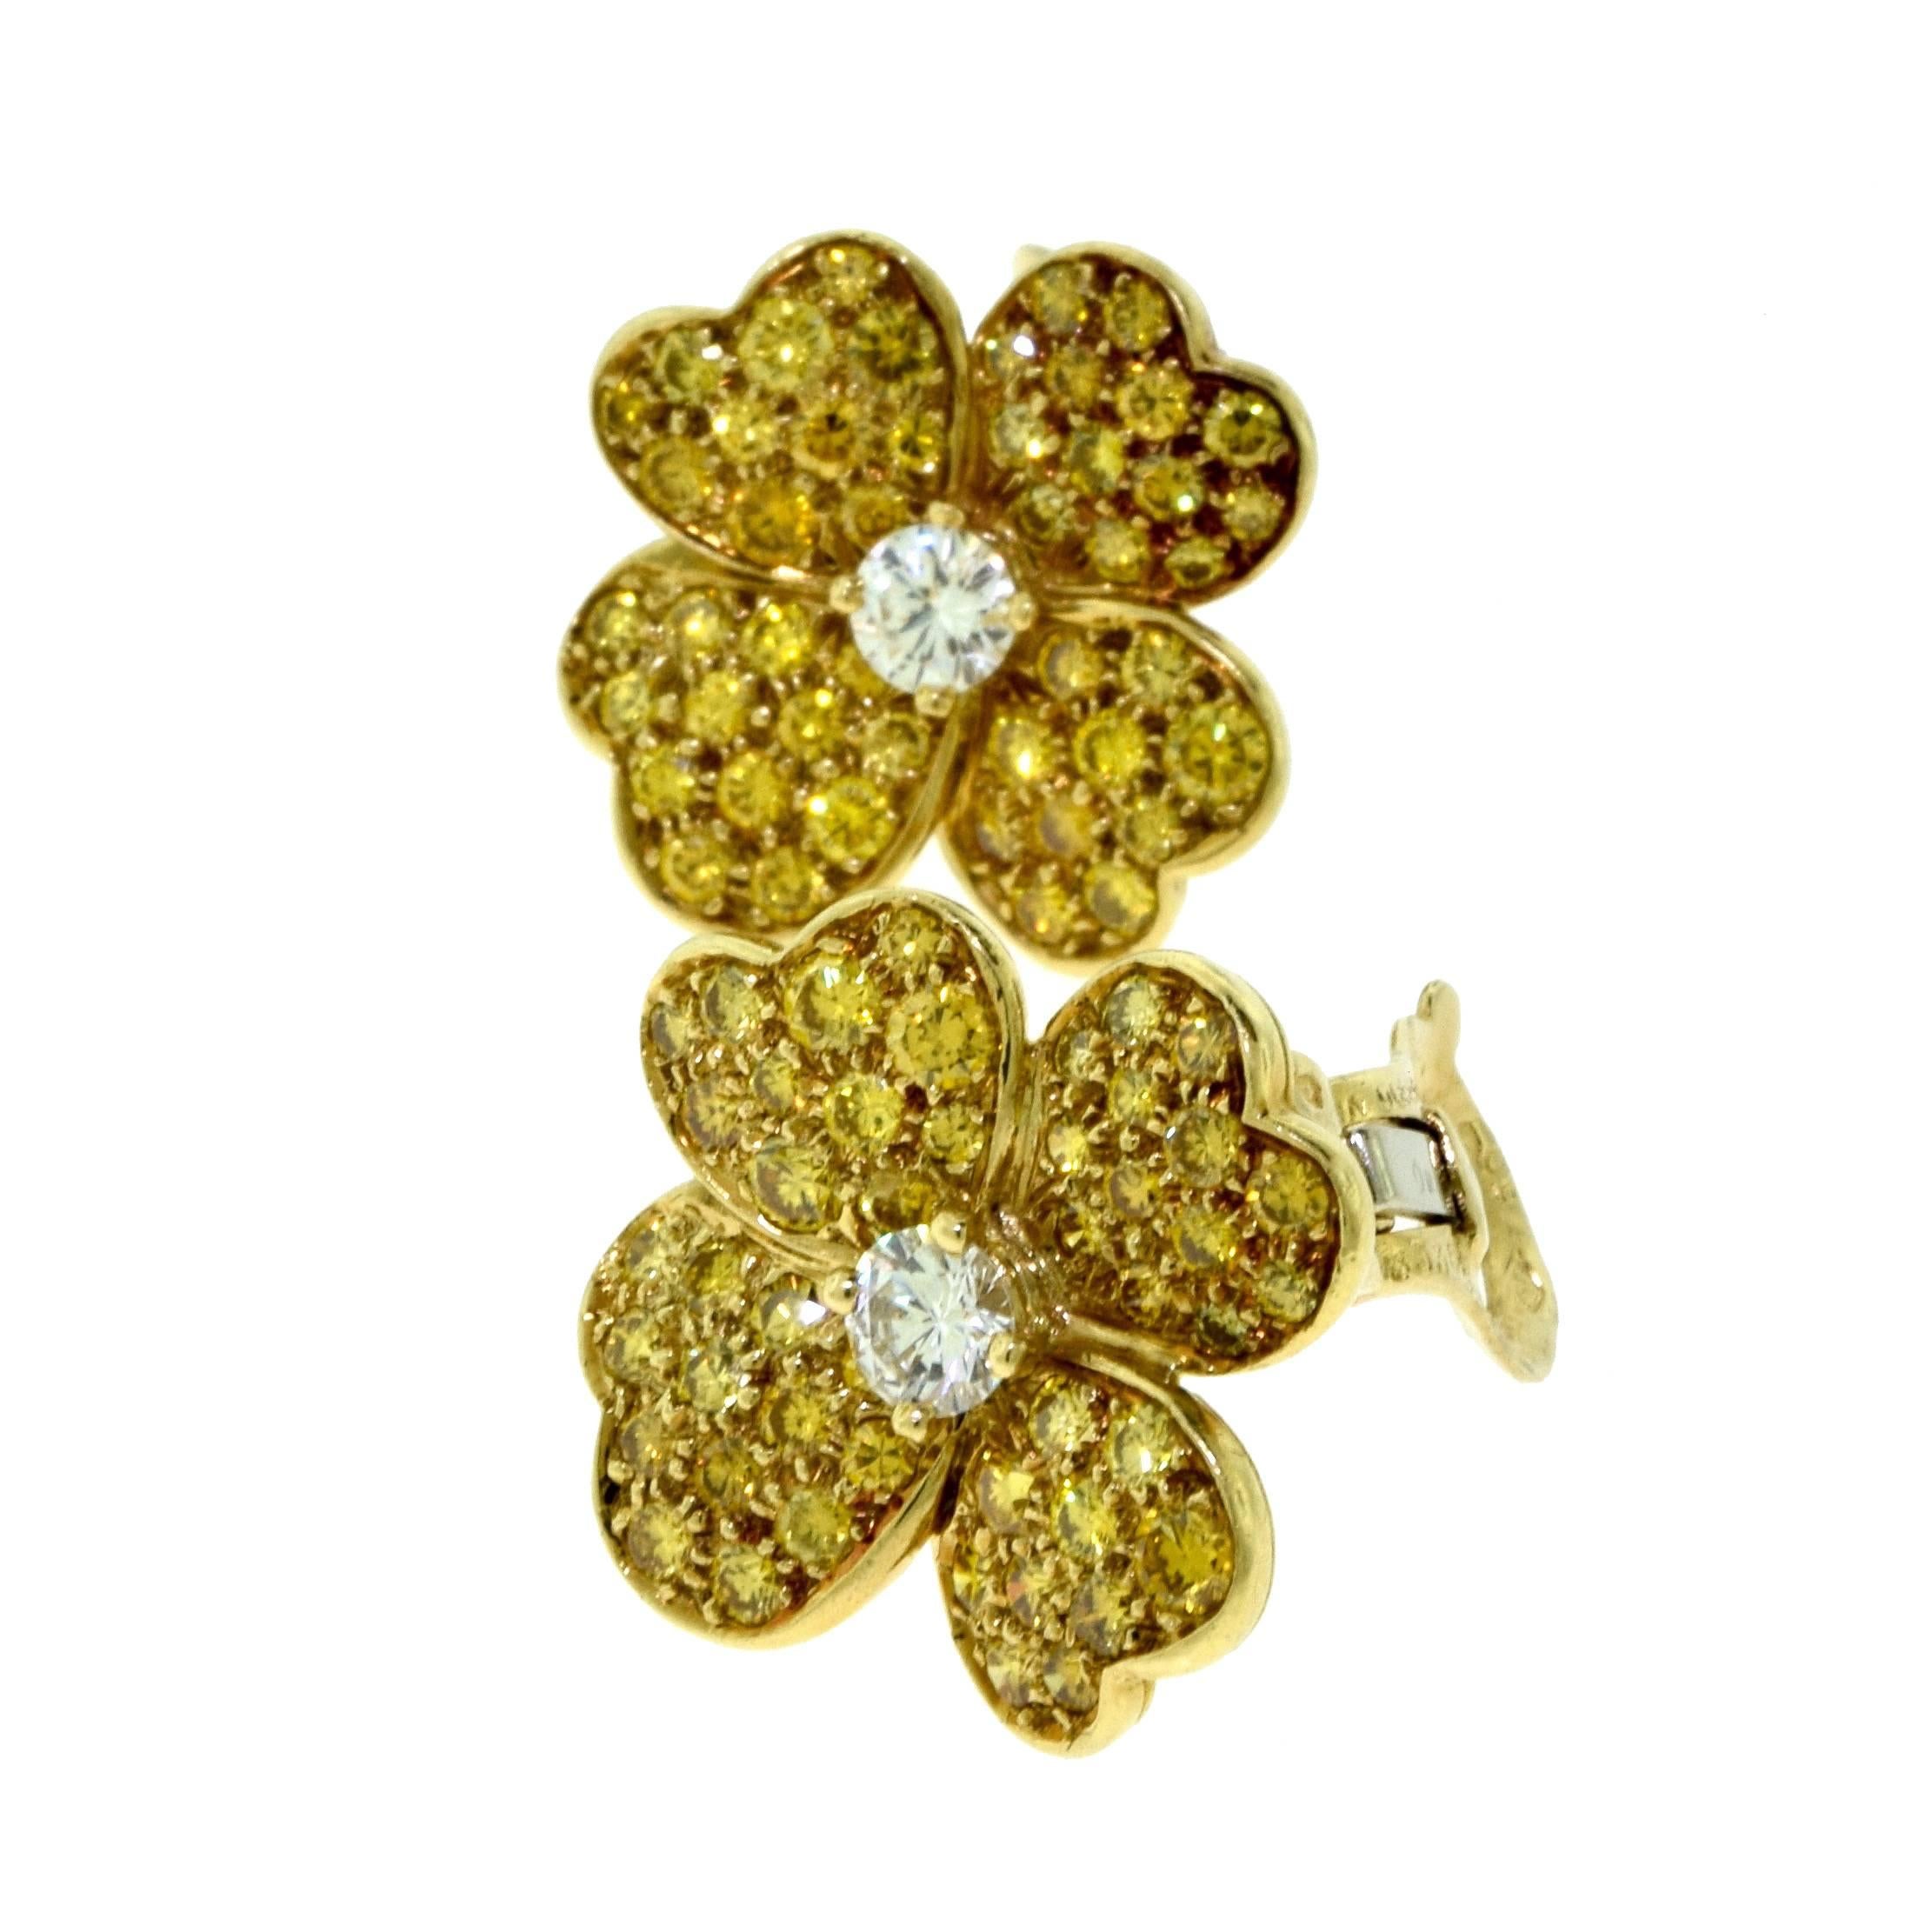 ITEM SPECIFICATIONS:
Designer: Van Cleef & Arpels
Collection: Cosmos
Metal: Yellow Gold , White Gold
Metal Purity: 18k
Stones: 2 Diamond Stones , Yellow Gold Diamonds
Total Item Weight (g): 10.2
Measurements: 19.96 x 20.25 mm
Collateral: Certificate